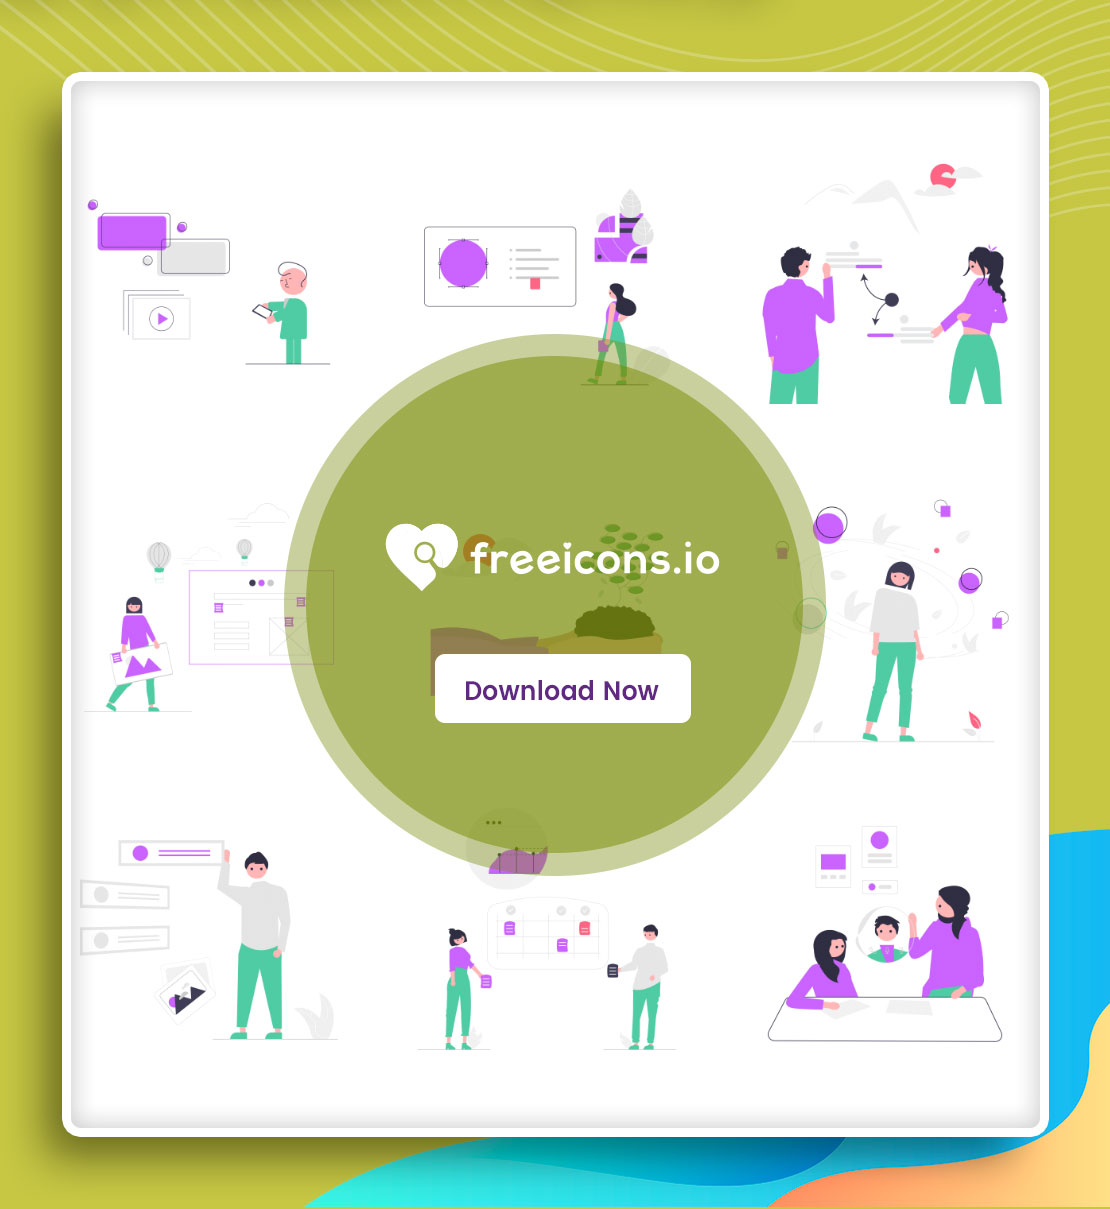 FREEIICONS offers millions of free icons and illustrations